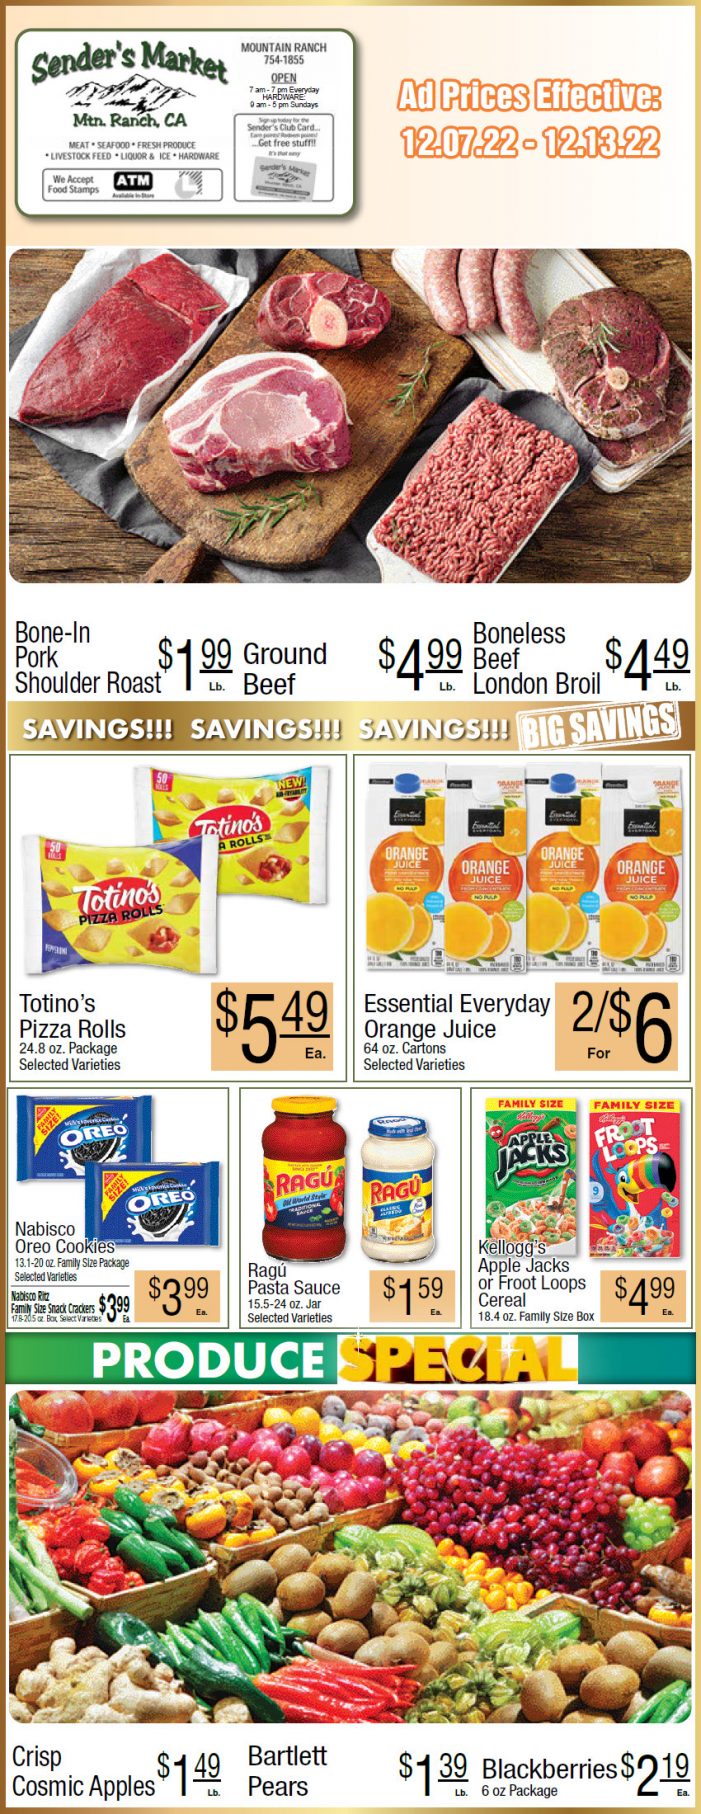 Sender’s Market Weekly Ad & Grocery Specials December 7 – 13th! Shop Local & Save!